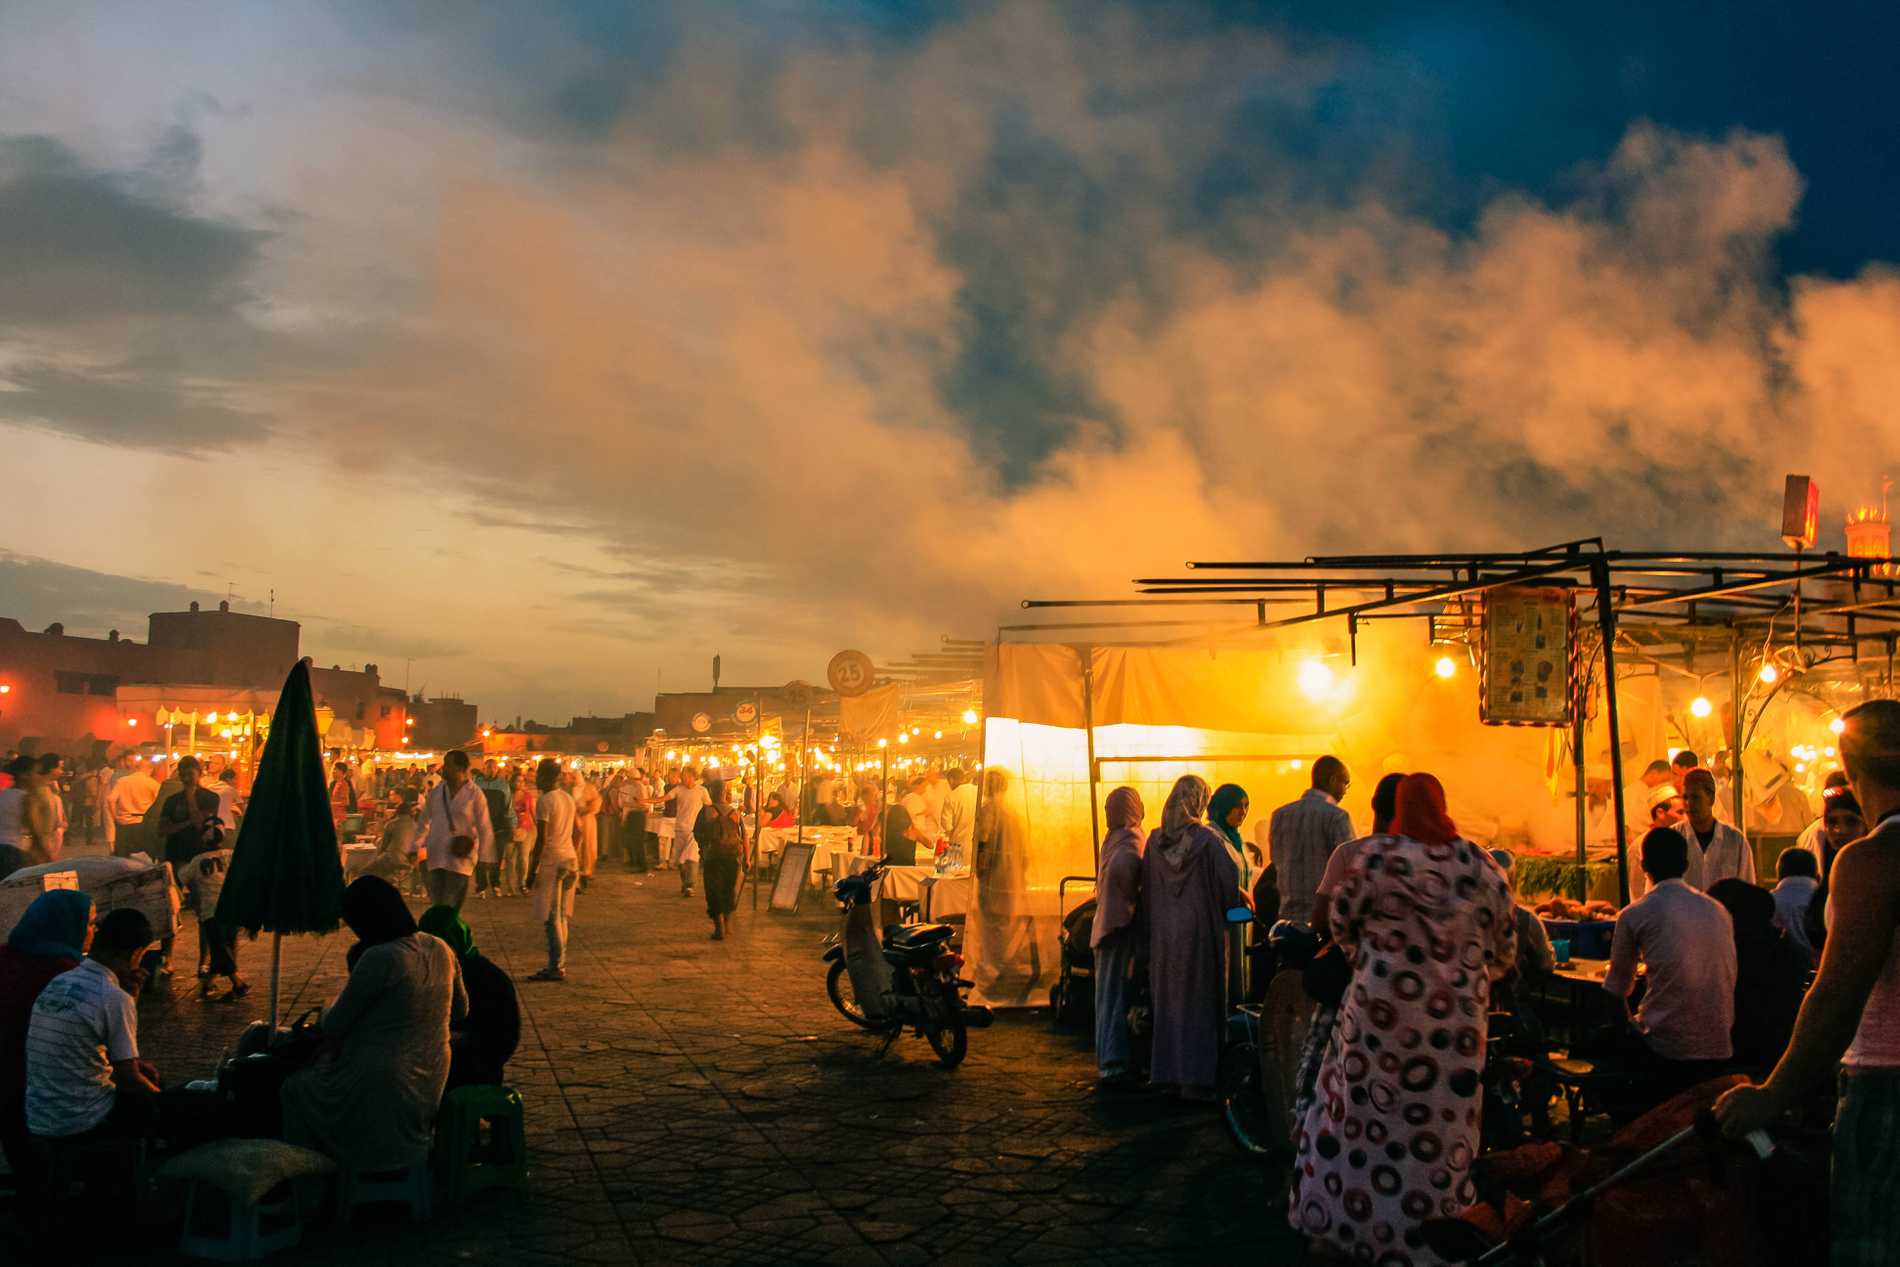 The main square (Jemaa el-Fnaa) in Marrakech glows at night with the fires of street vendors cooking food.